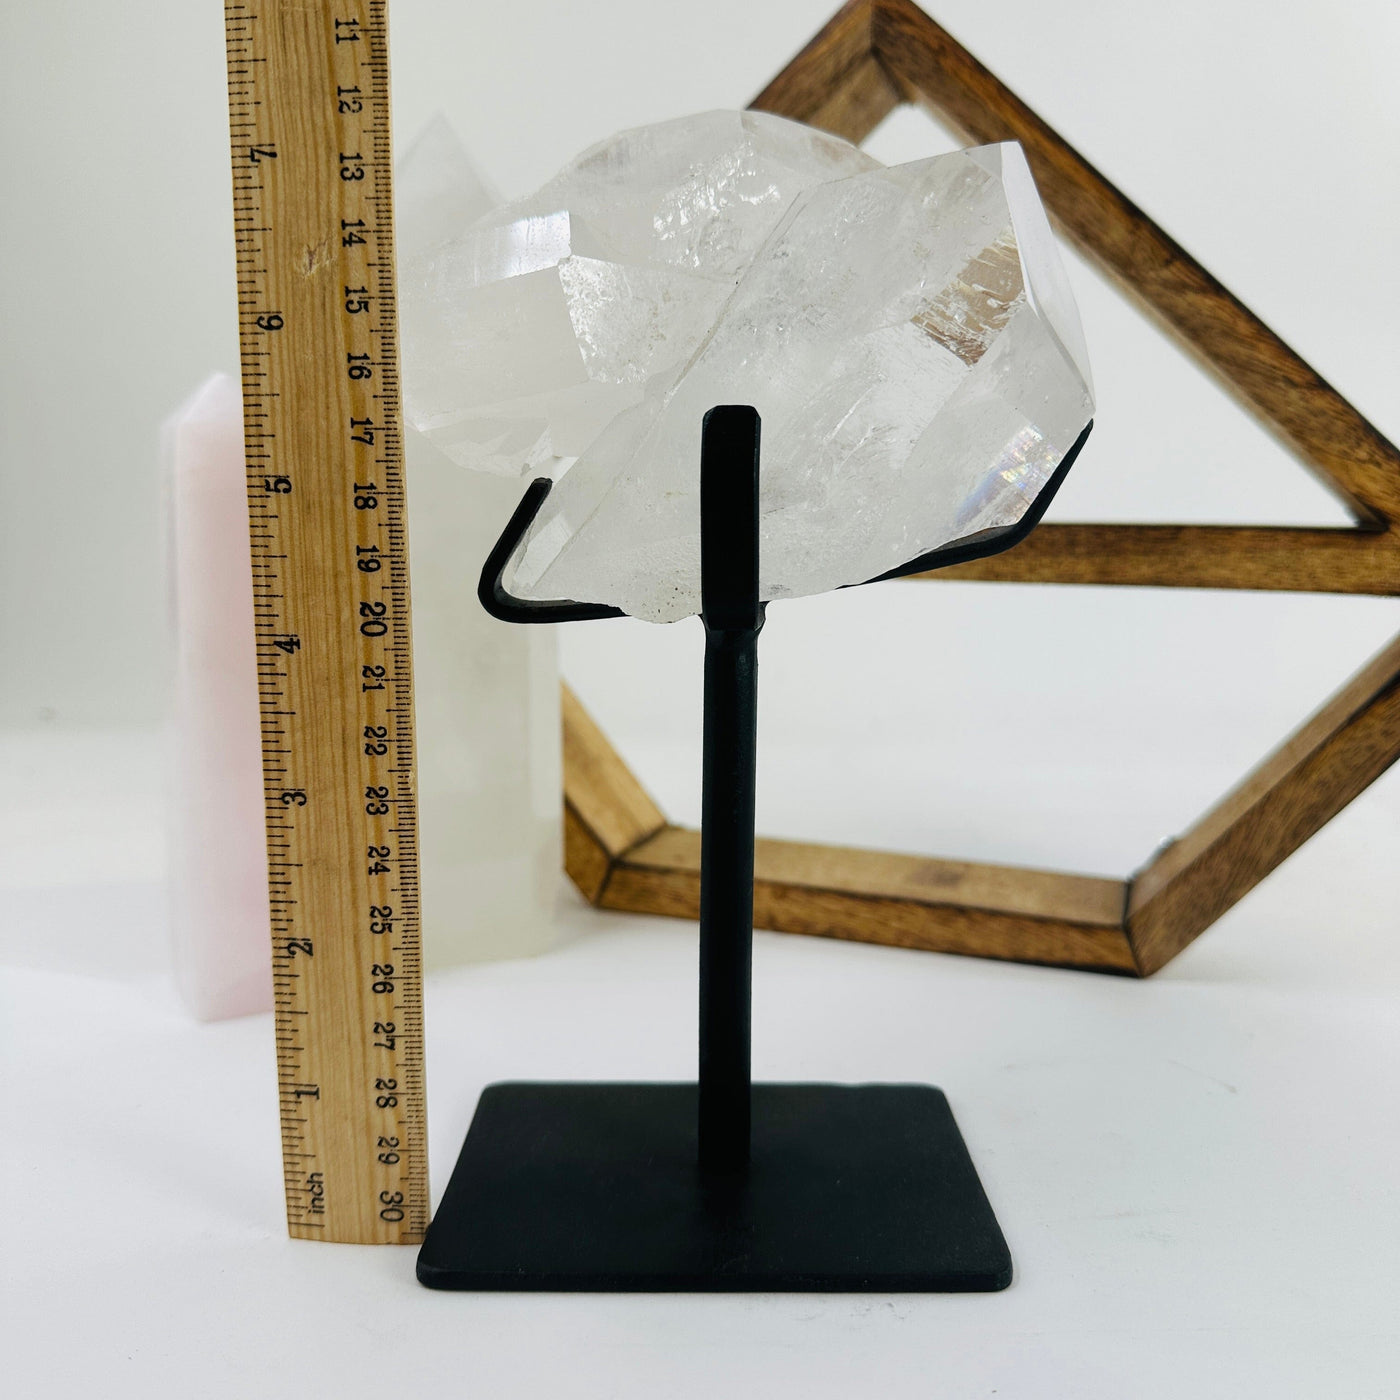 crystal quartz on metal stand next to a ruler for size reference